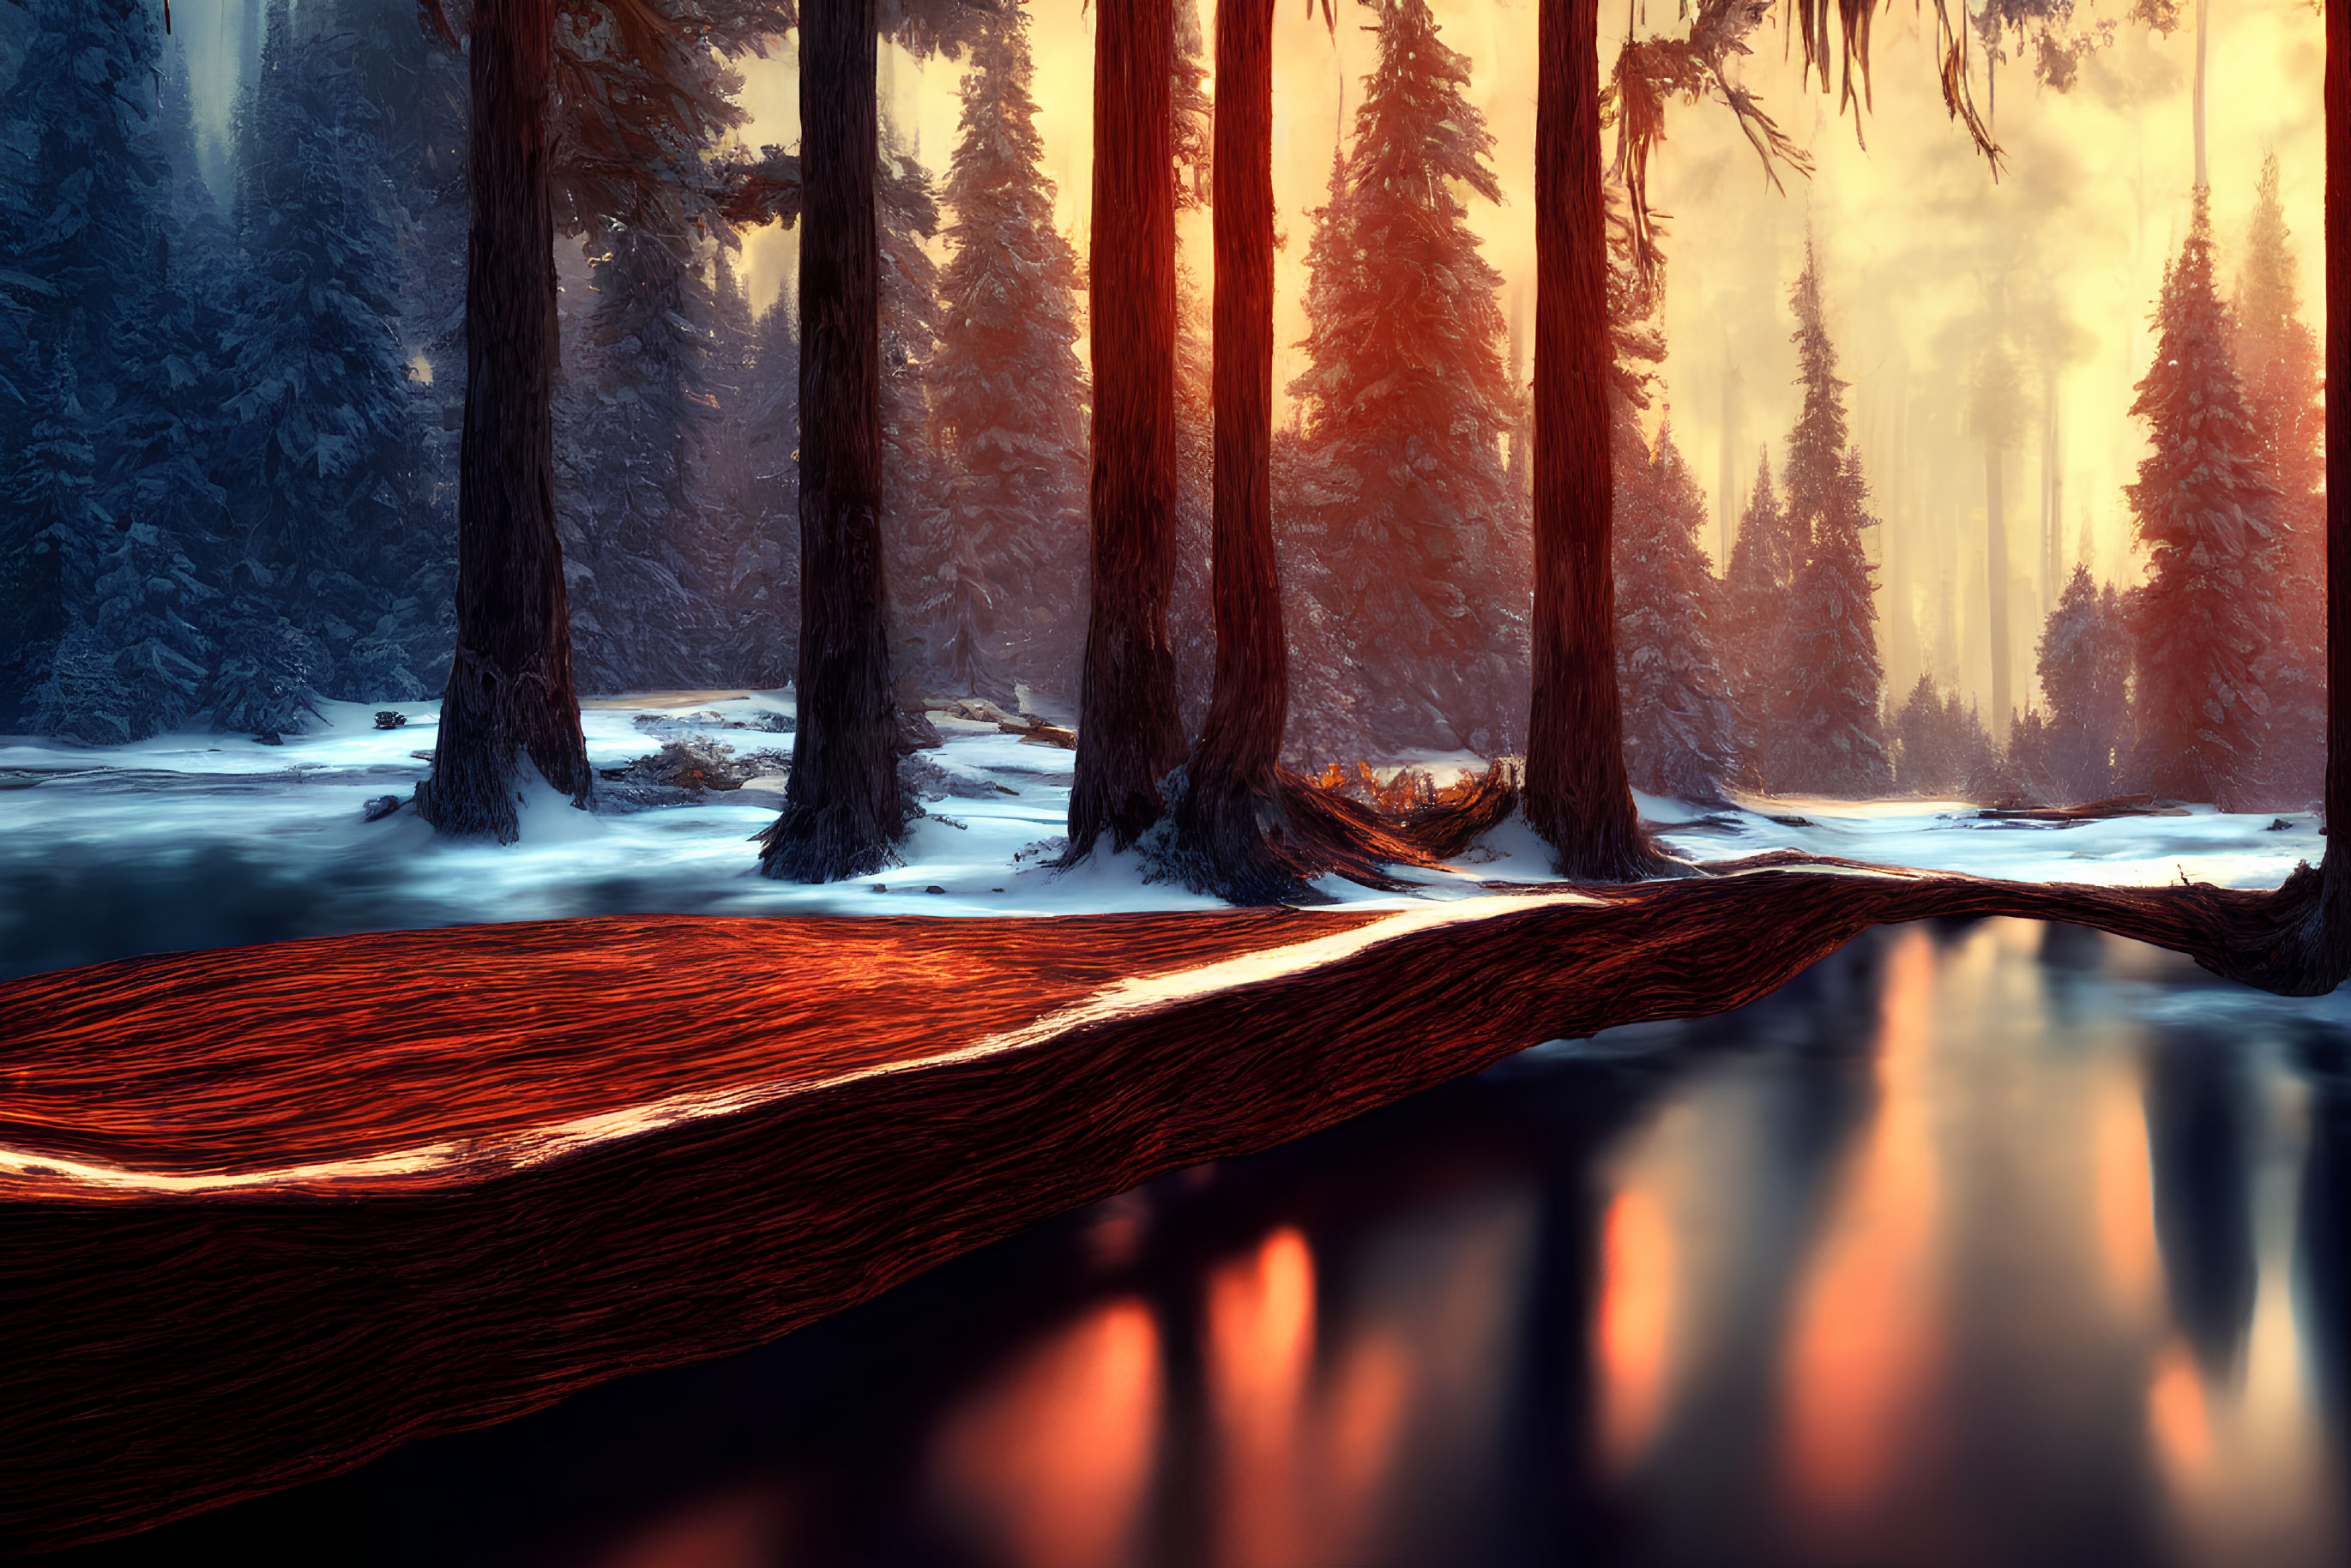 Snow-covered wintry forest with river at sunset